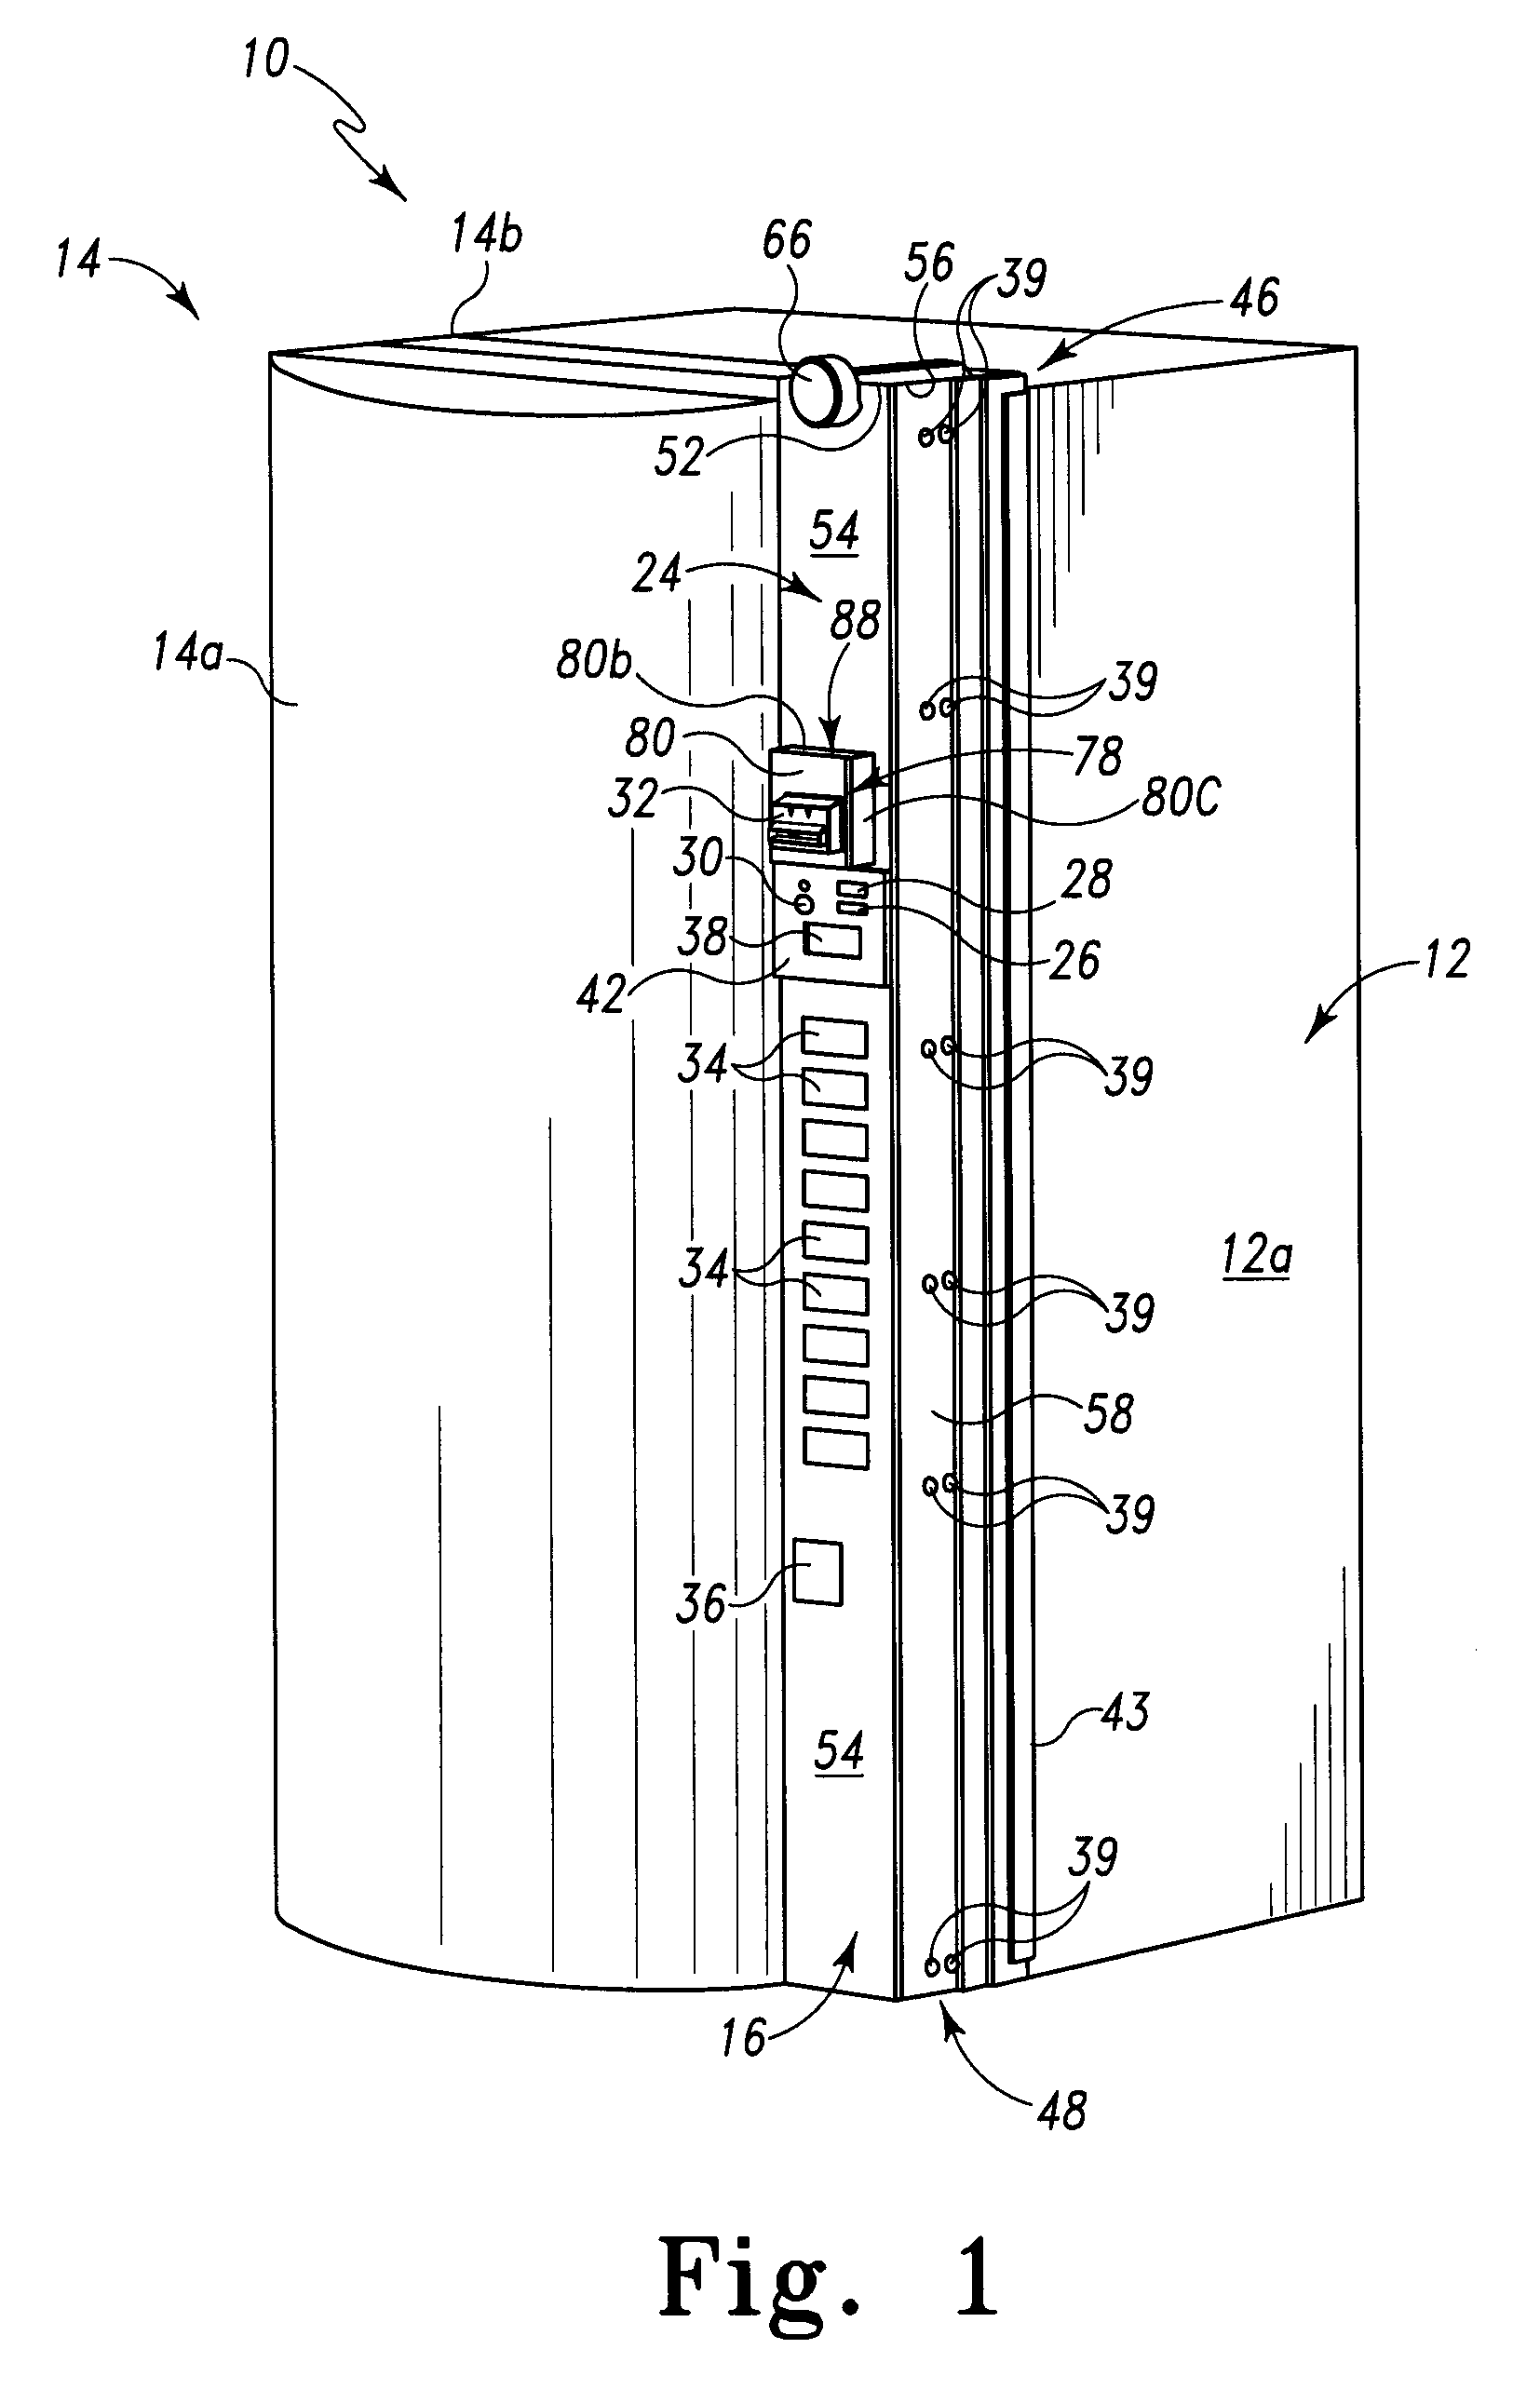 Apparatus and method for reducing loss in a vending machine due to forced entry and vandalism